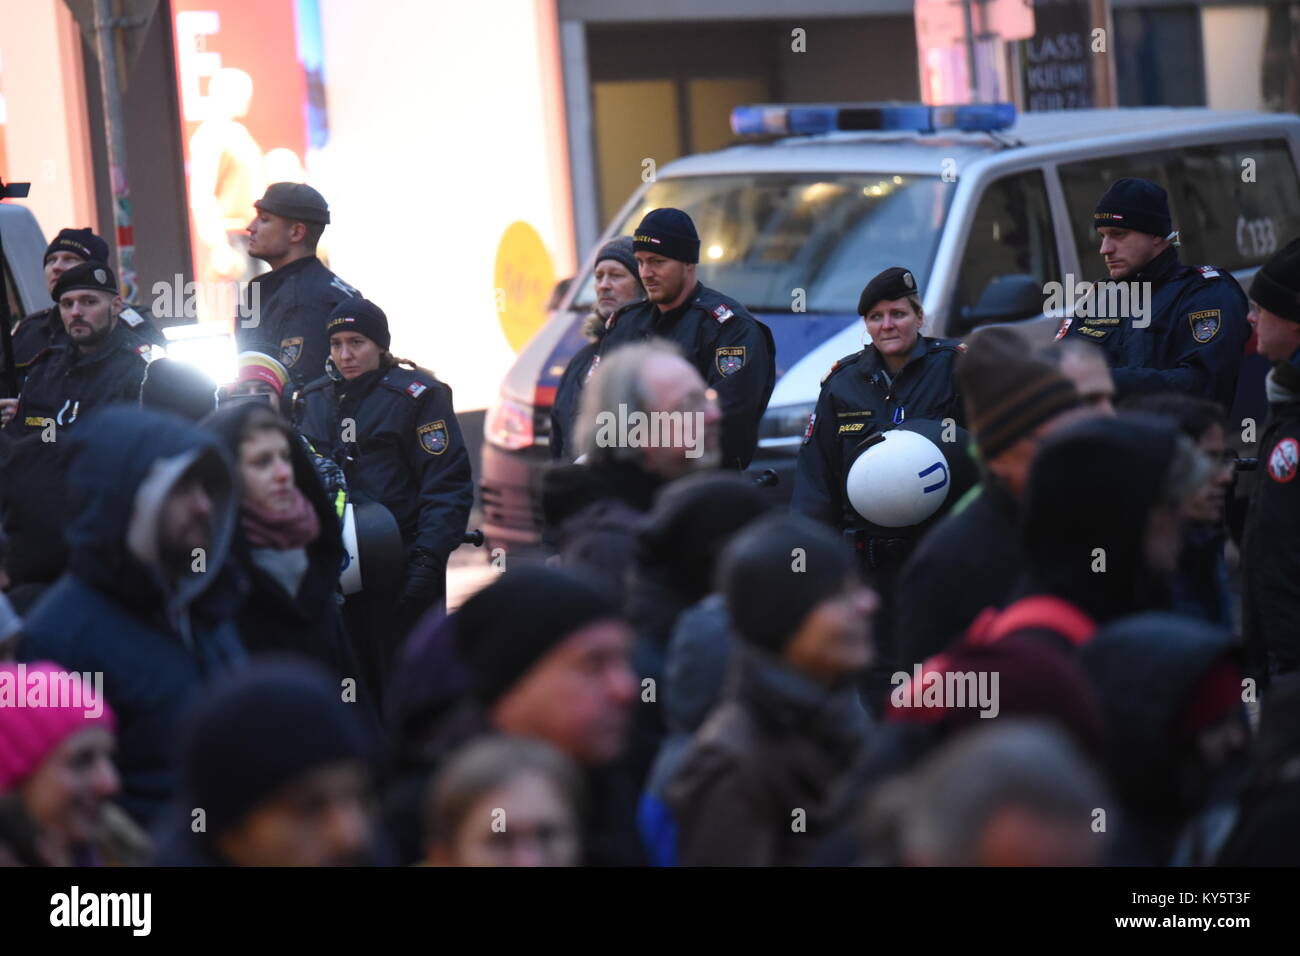 Vienna, Austria. 13th Jan, 2018. police officers guard the protest march through Vienna's main shopping street during an anti-government demonstration. Credit: Vincent Sufiyan/Alamy Live News Stock Photo